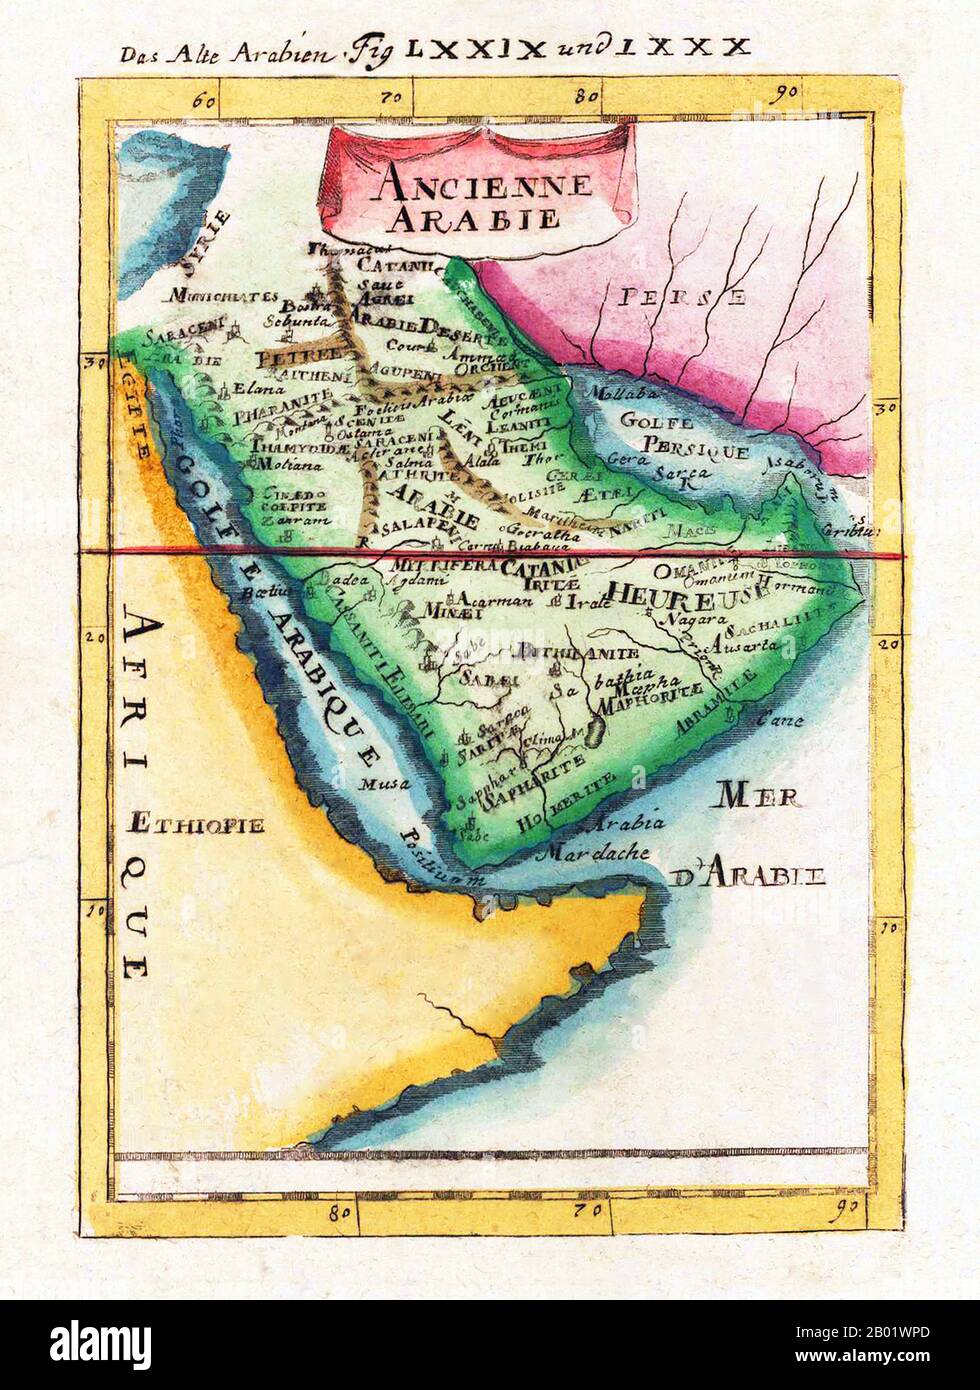 Middle East: Map of Ancient Arabia ('Ancienne Arabie' ) by Allain Manesson Mallet (1630-1706),  Frankfurt, 1719.  Alain Manesson Mallet was a French cartographer and engineer. He started his career as a soldier in the army of Louis XIV, became a Sergeant-Major in the artillery and an Inspector of Fortifications. He also served under the King of Portugal, before returning to France, and his appointment to the court of Louis XIV. His military engineering and mathematical background led to his position teaching mathematics at court. Stock Photo